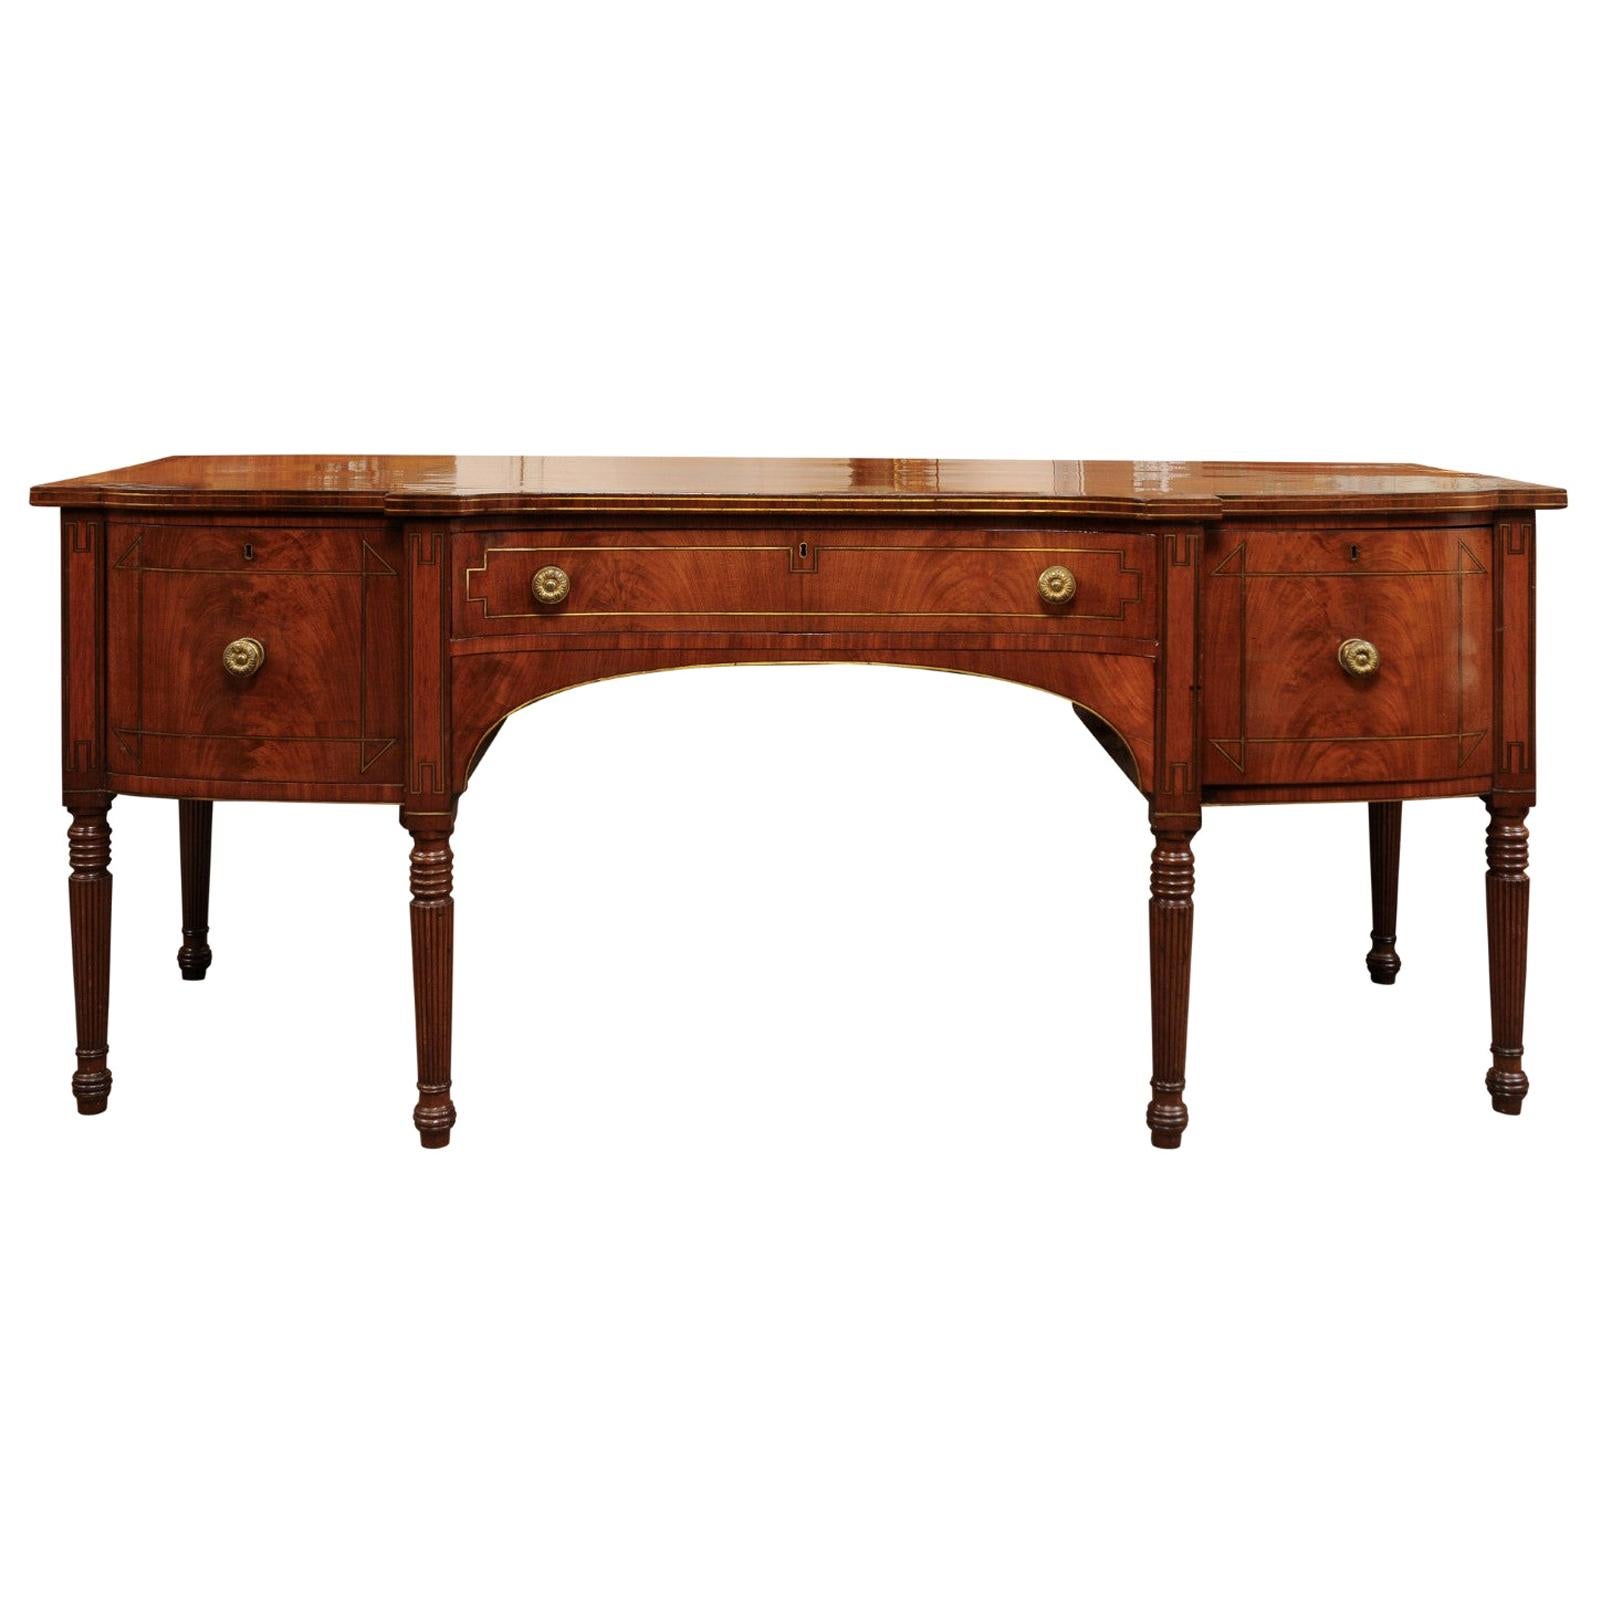 English Regency Mahogany and Brass Inlaid Sideboard, Early 19th Century